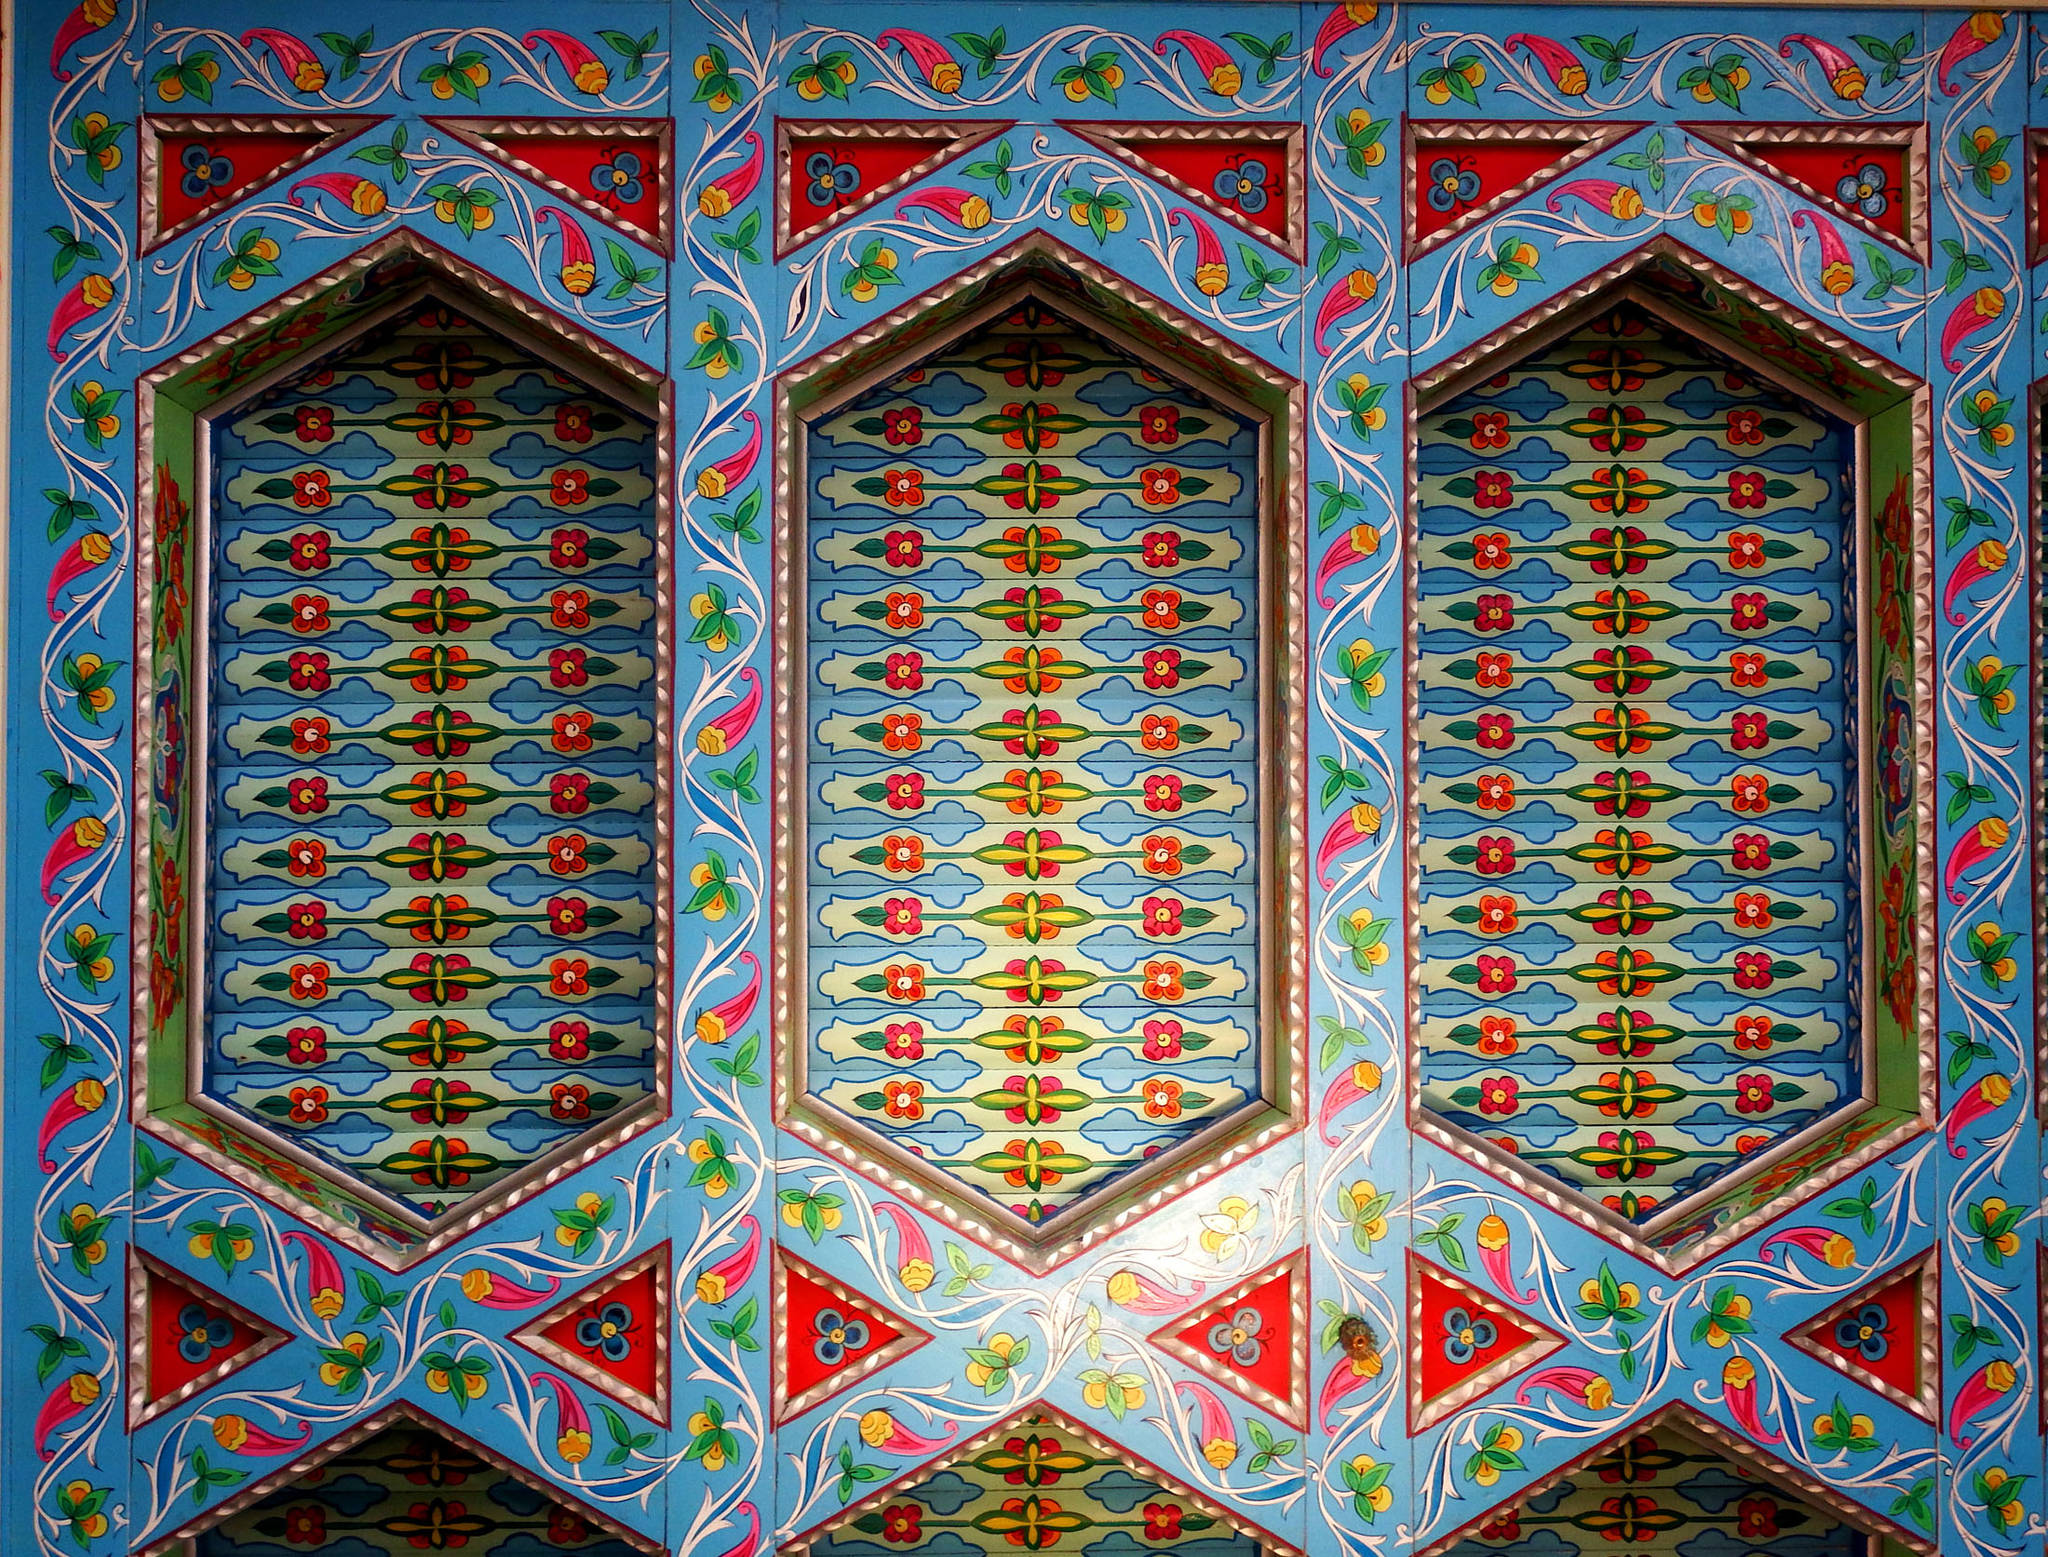 Details from the Dushanbe Tea House in Boulder. The tea house was a gift from Dushanbe, Tajikistan to its sister city Boulder and is the only one of its kind in the western hemisphere. Photo by Linda Shaw.